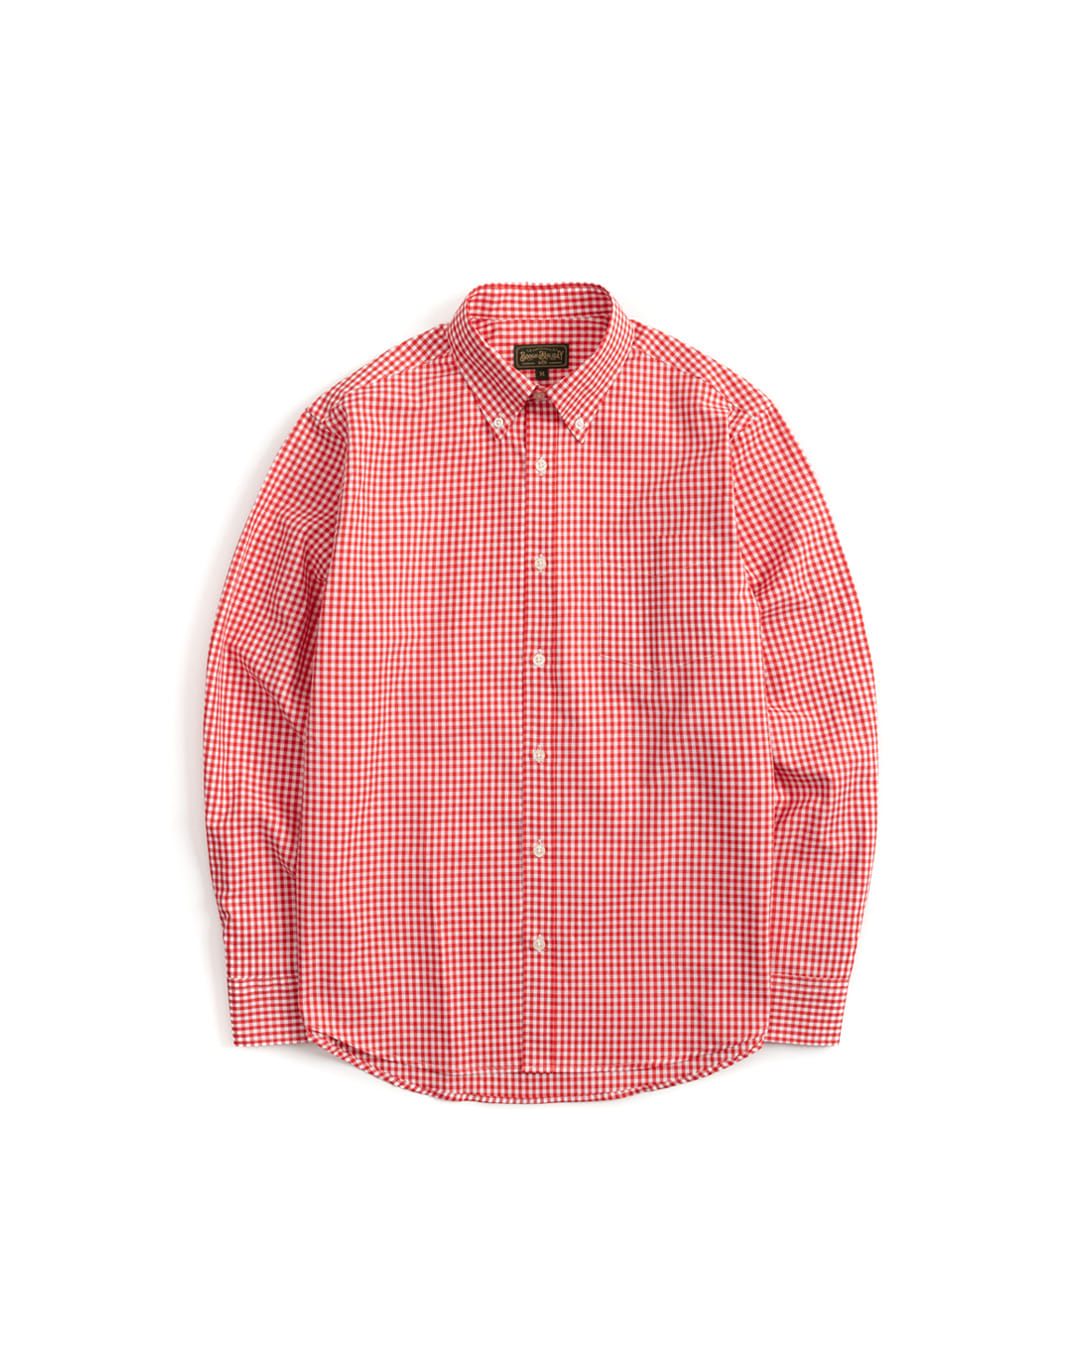 07 GINGHAM CHECK BUTTON DOWN SHIRT (red)